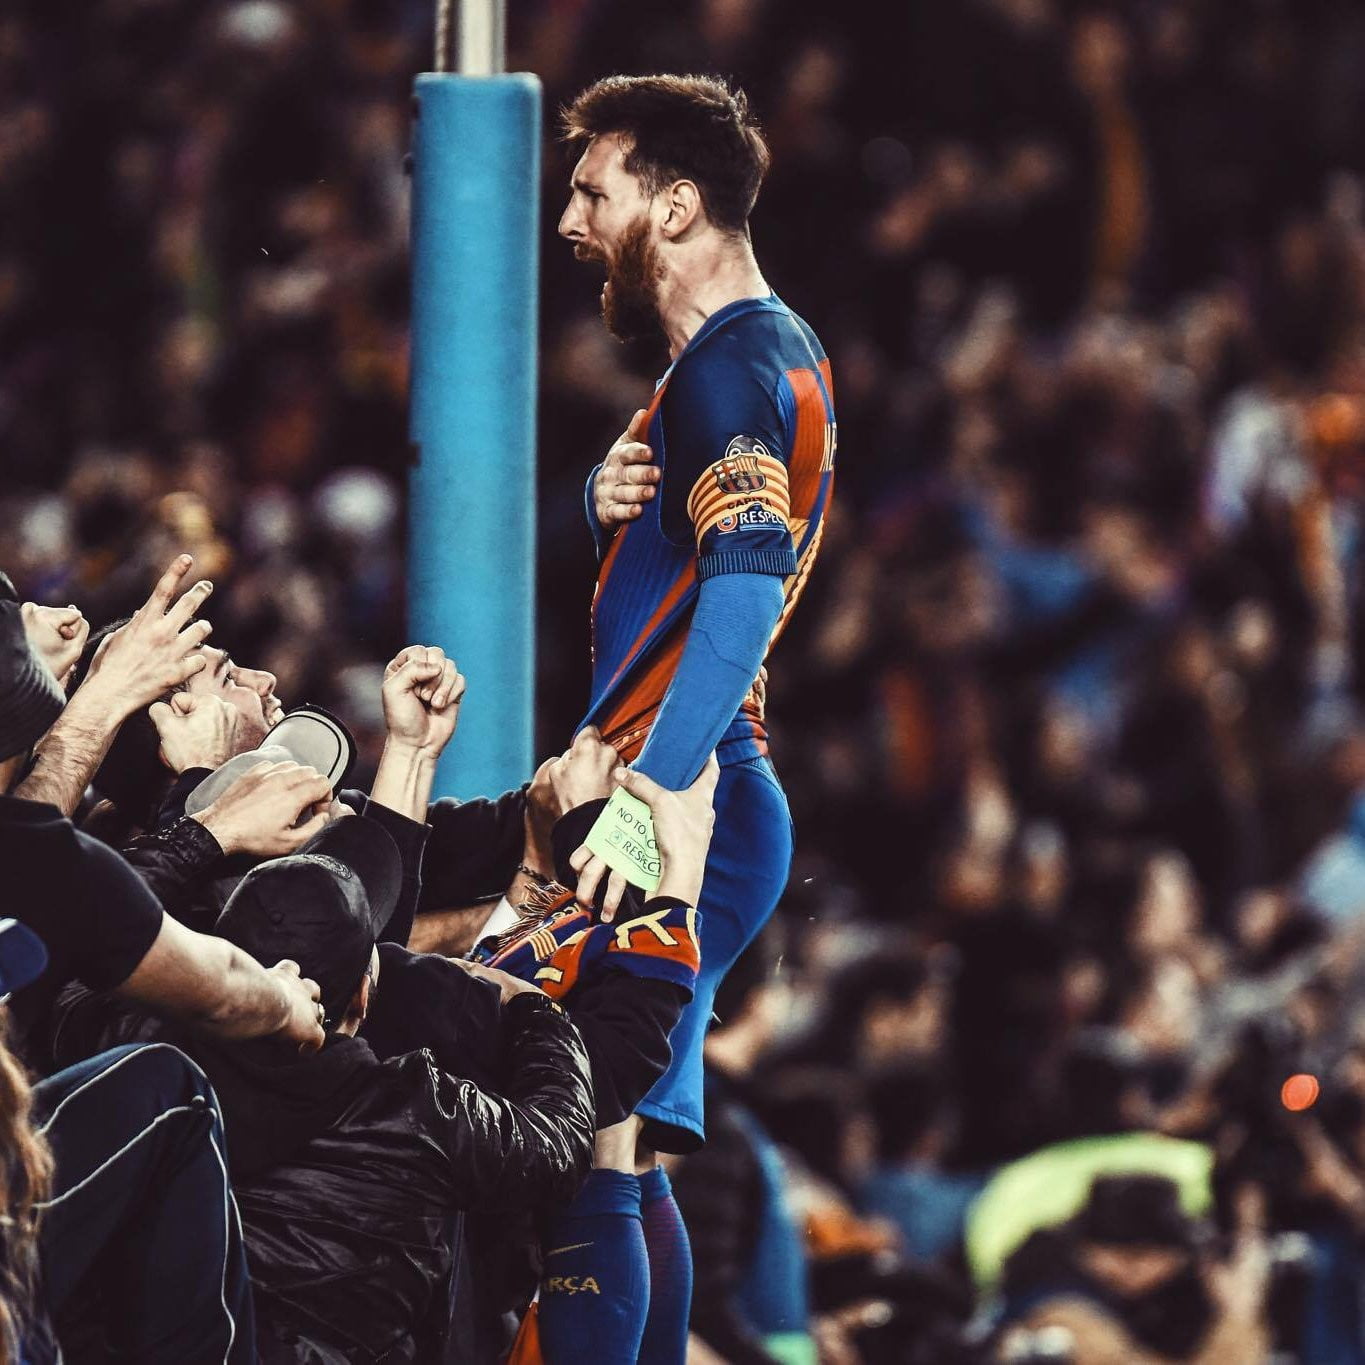 Messi Celebration With Fans - HD Wallpaper 